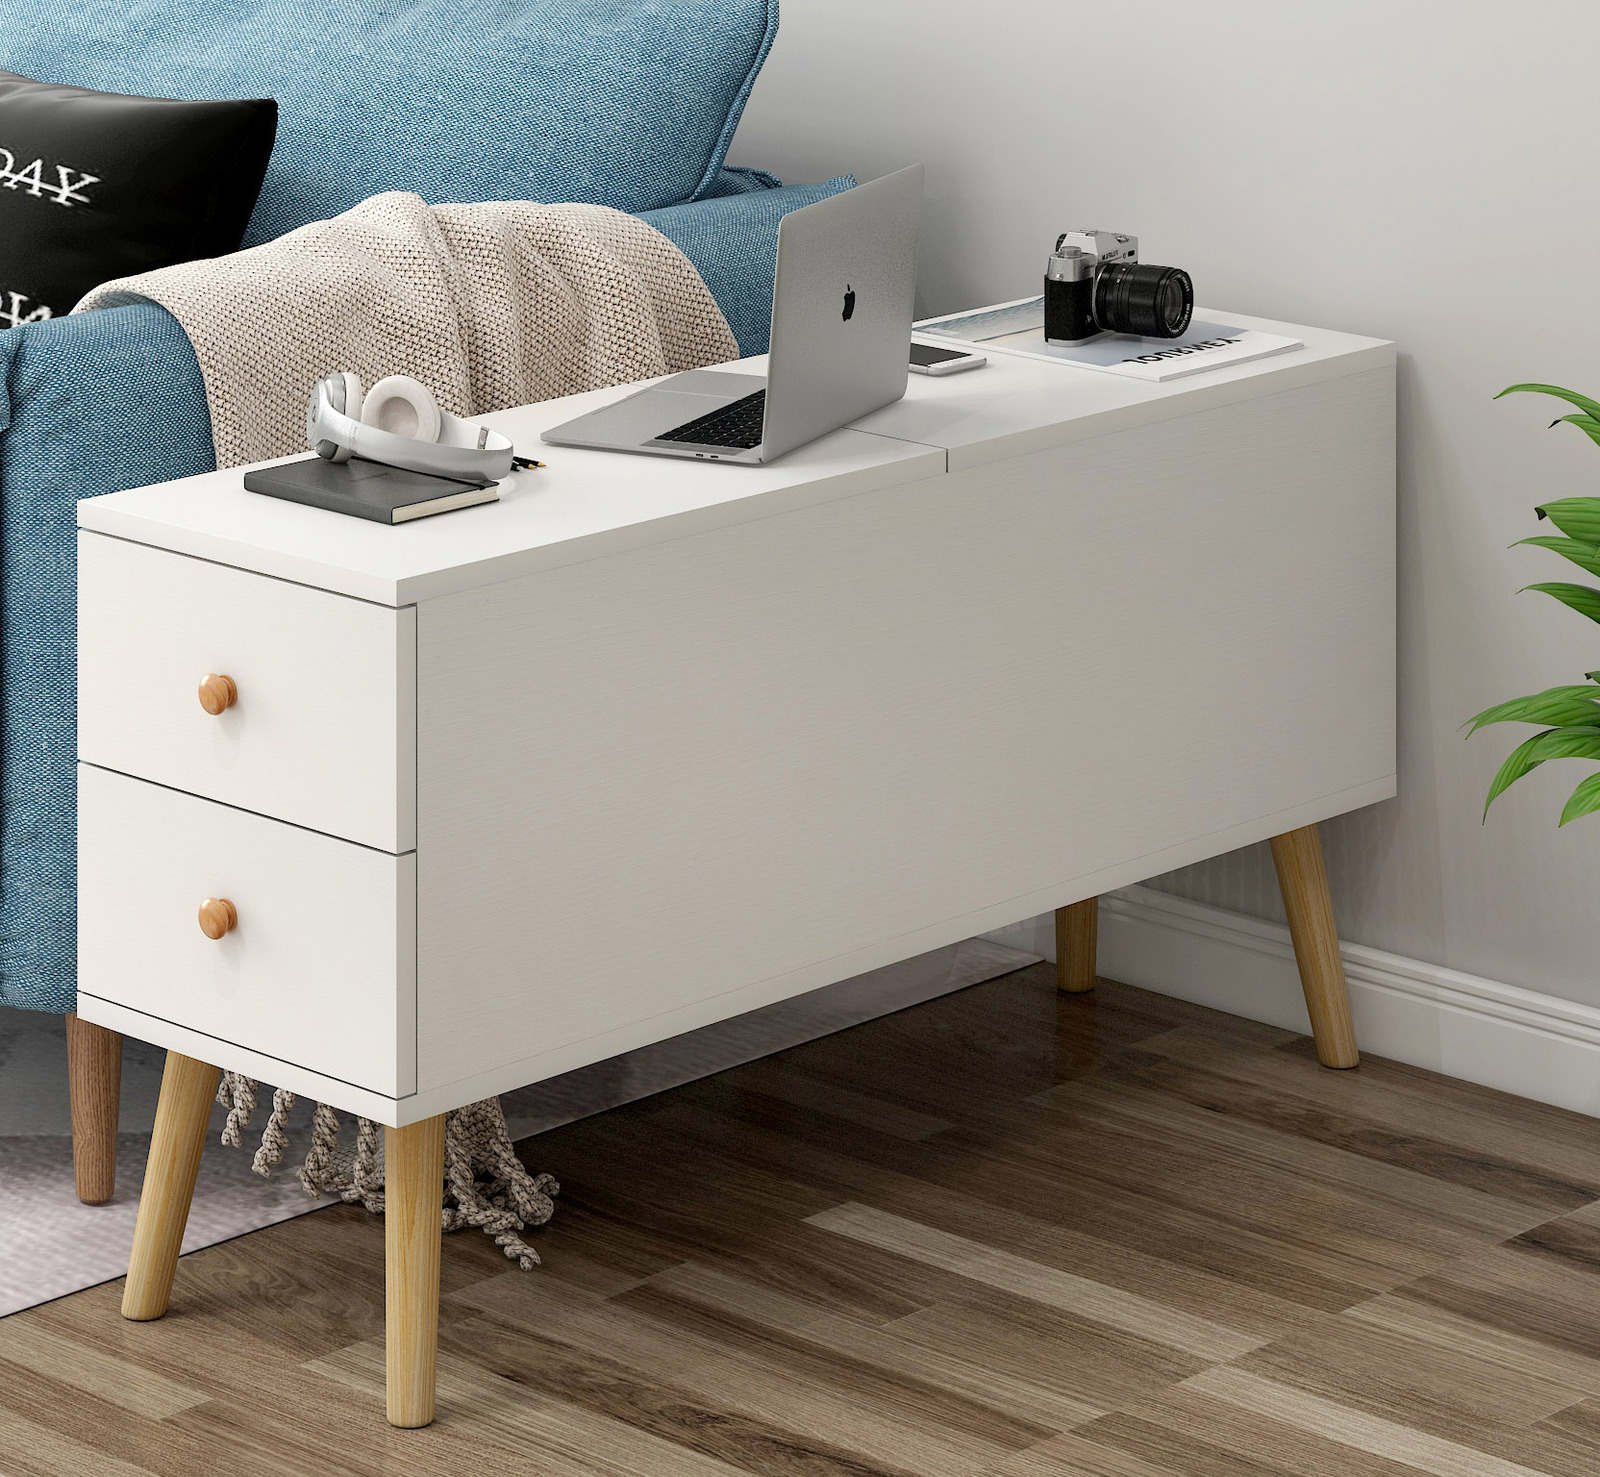 Atlantic Lift Storage Coffee Table with Drawers (White) -100cm